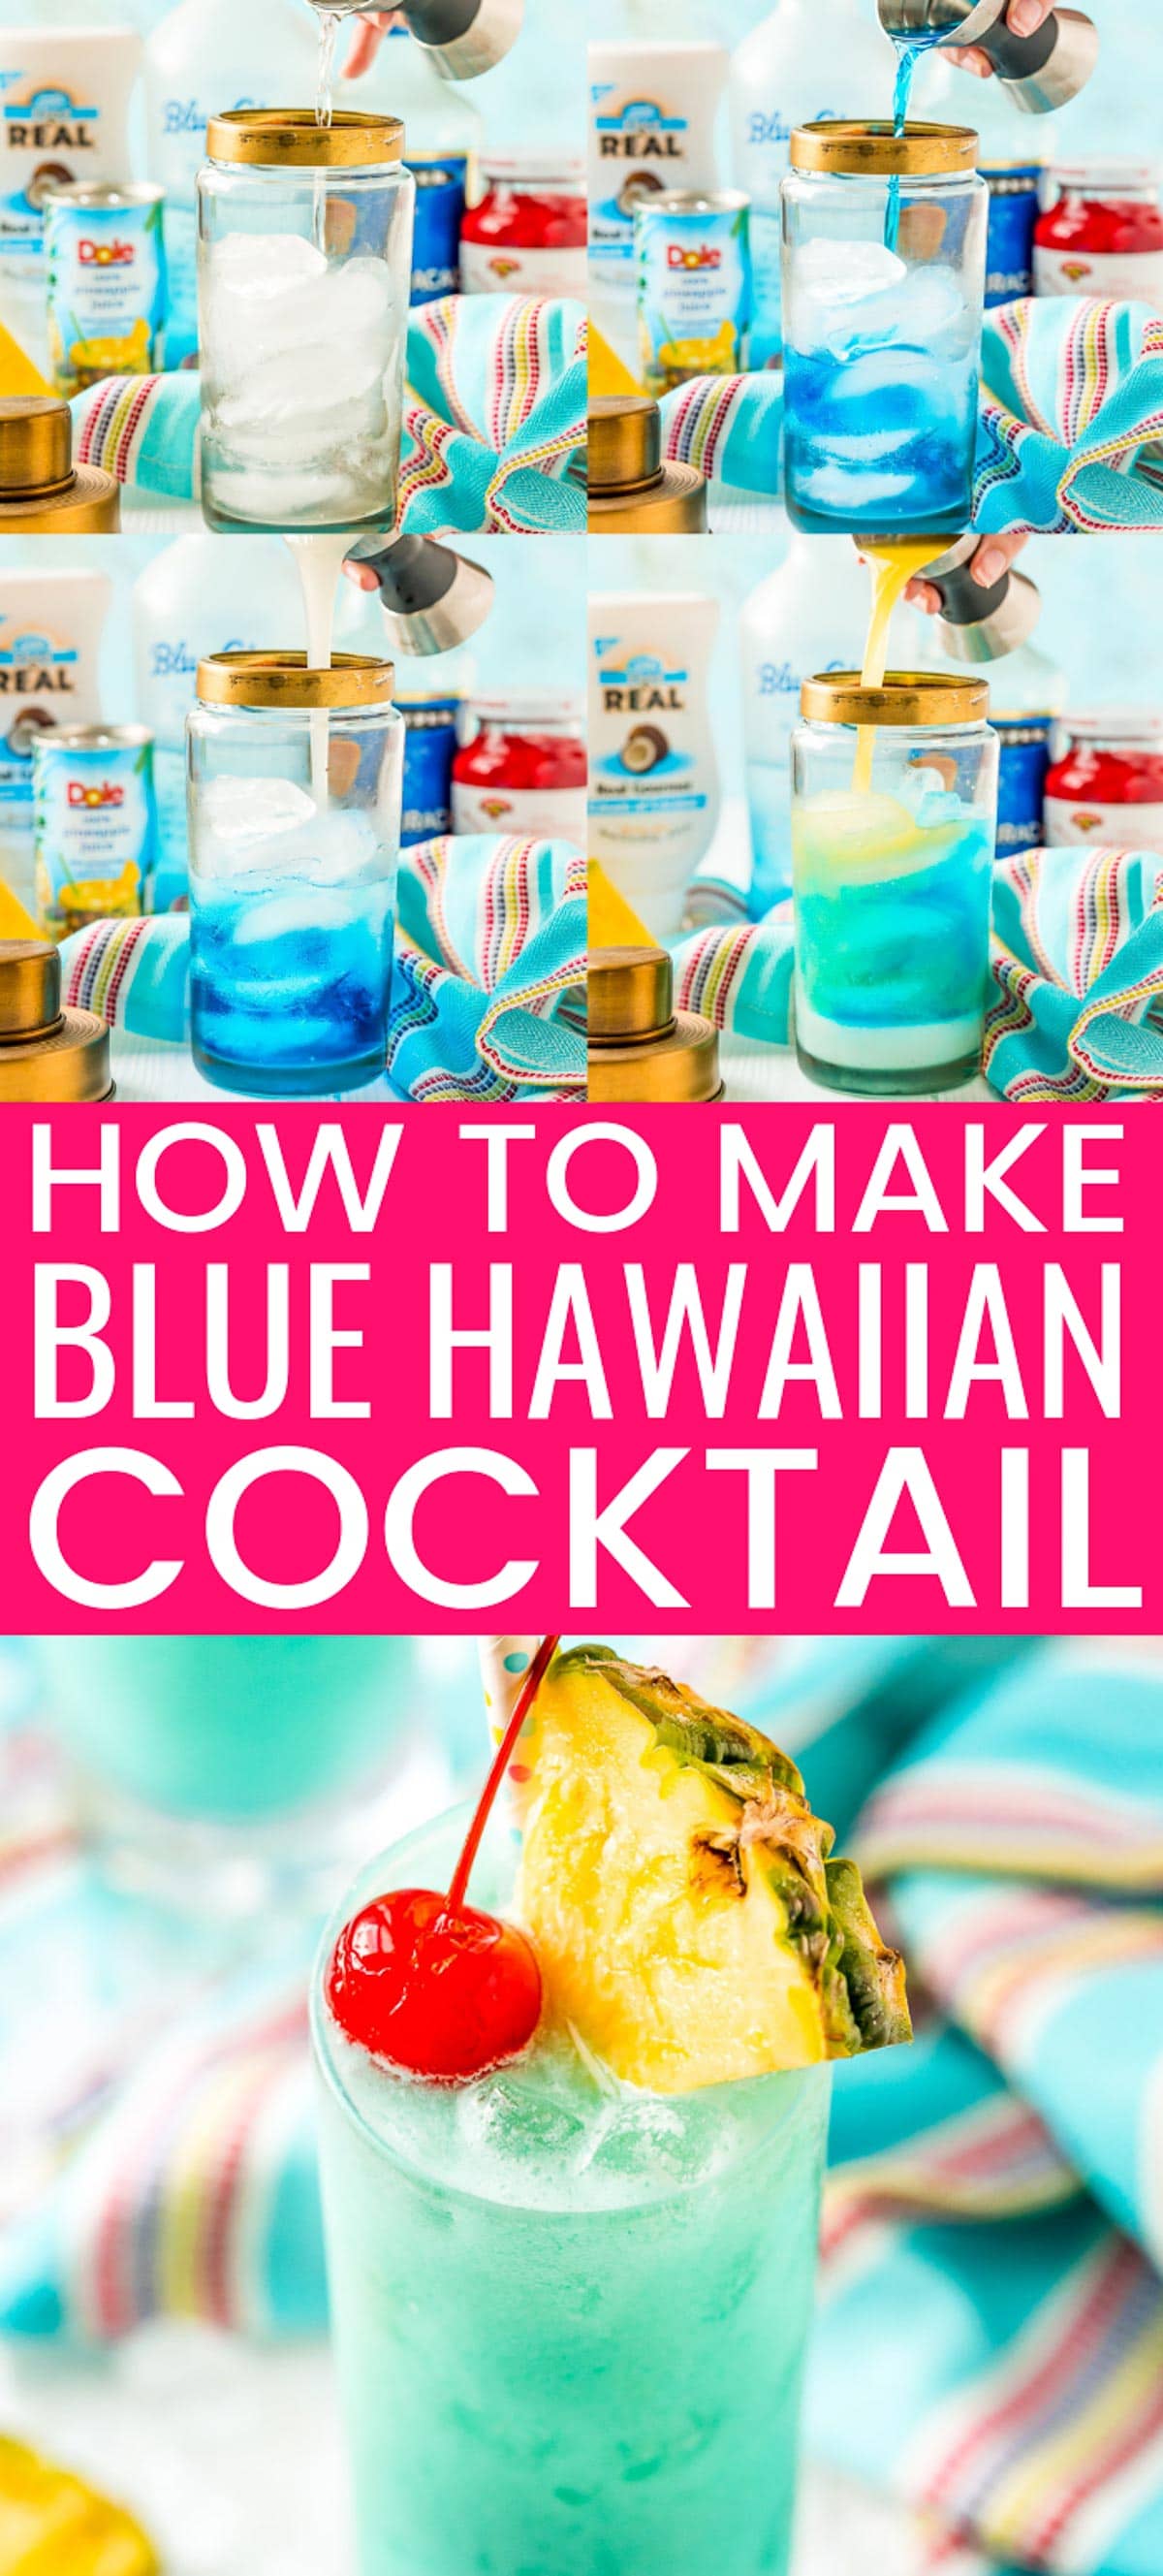 Blue Hawaiian Cocktail is a tropical drink recipe made with rum, blue curaçao, coconut cream, and pineapple juice. Serve it on the rocks or frozen - either way, it's delicious! via @sugarandsoulco